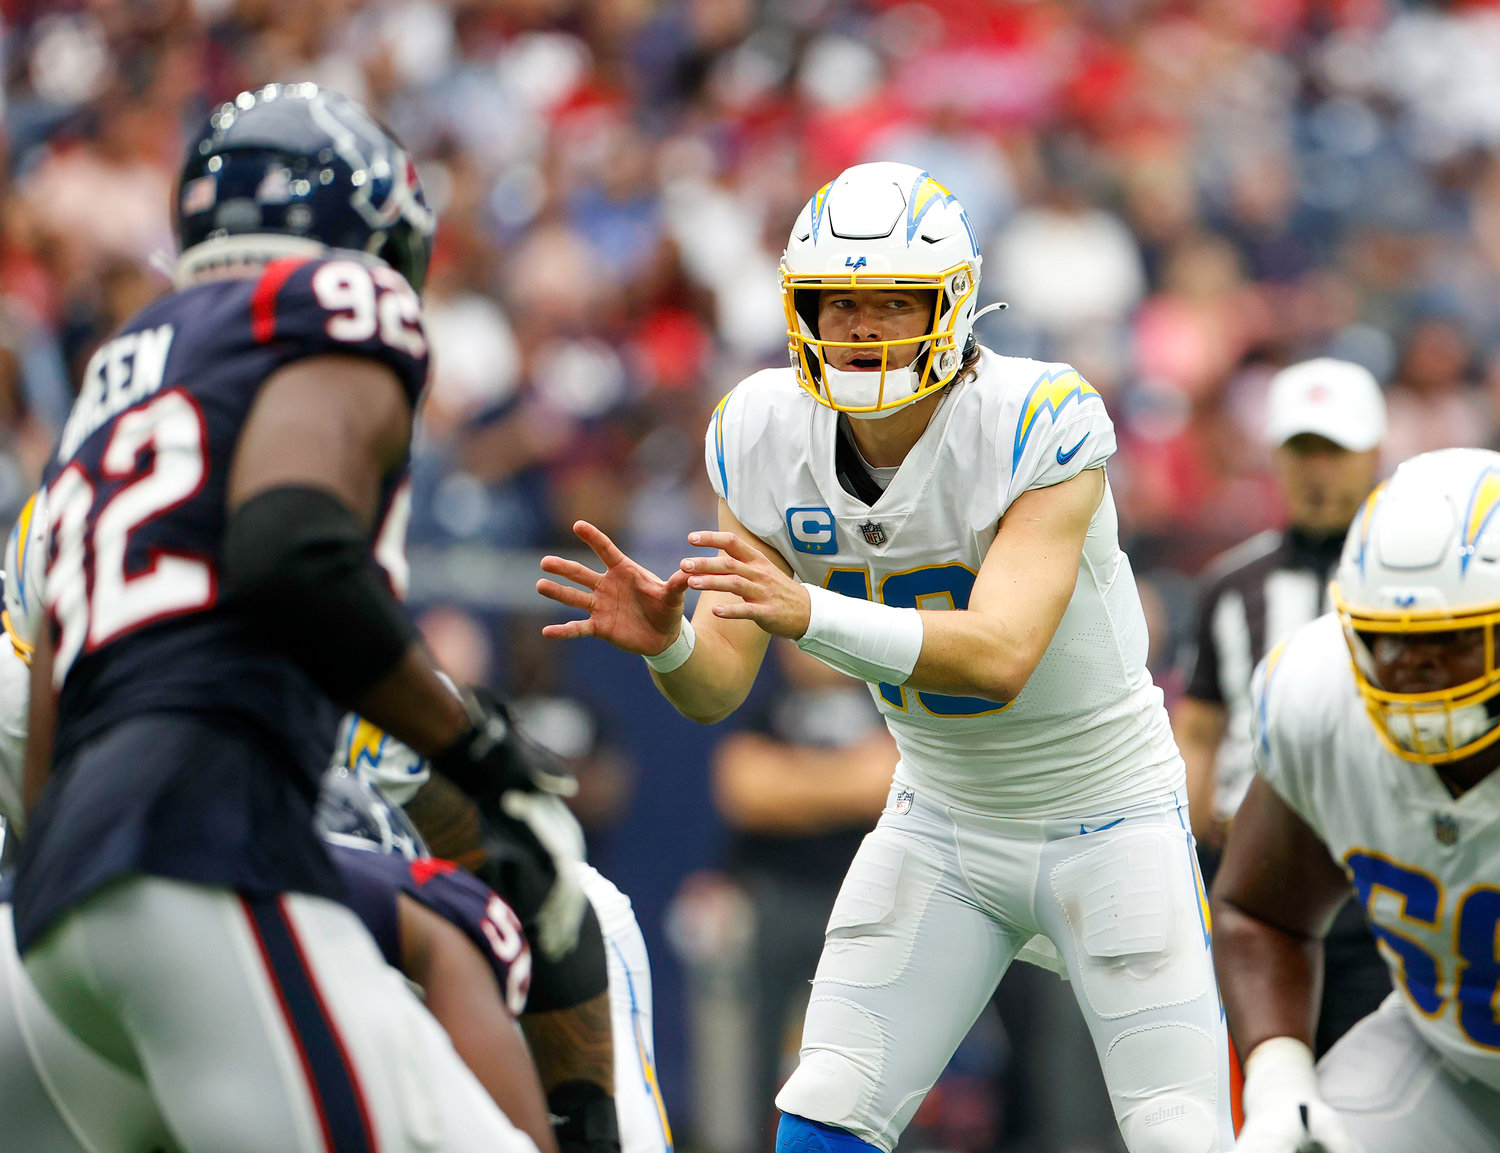 Chargers quarterback Justin Herbert (10) prepares for a snap during an NFL game between the Texans and the Chargers on Oct. 2, 2022 in Houston. The Chargers won 34-24.